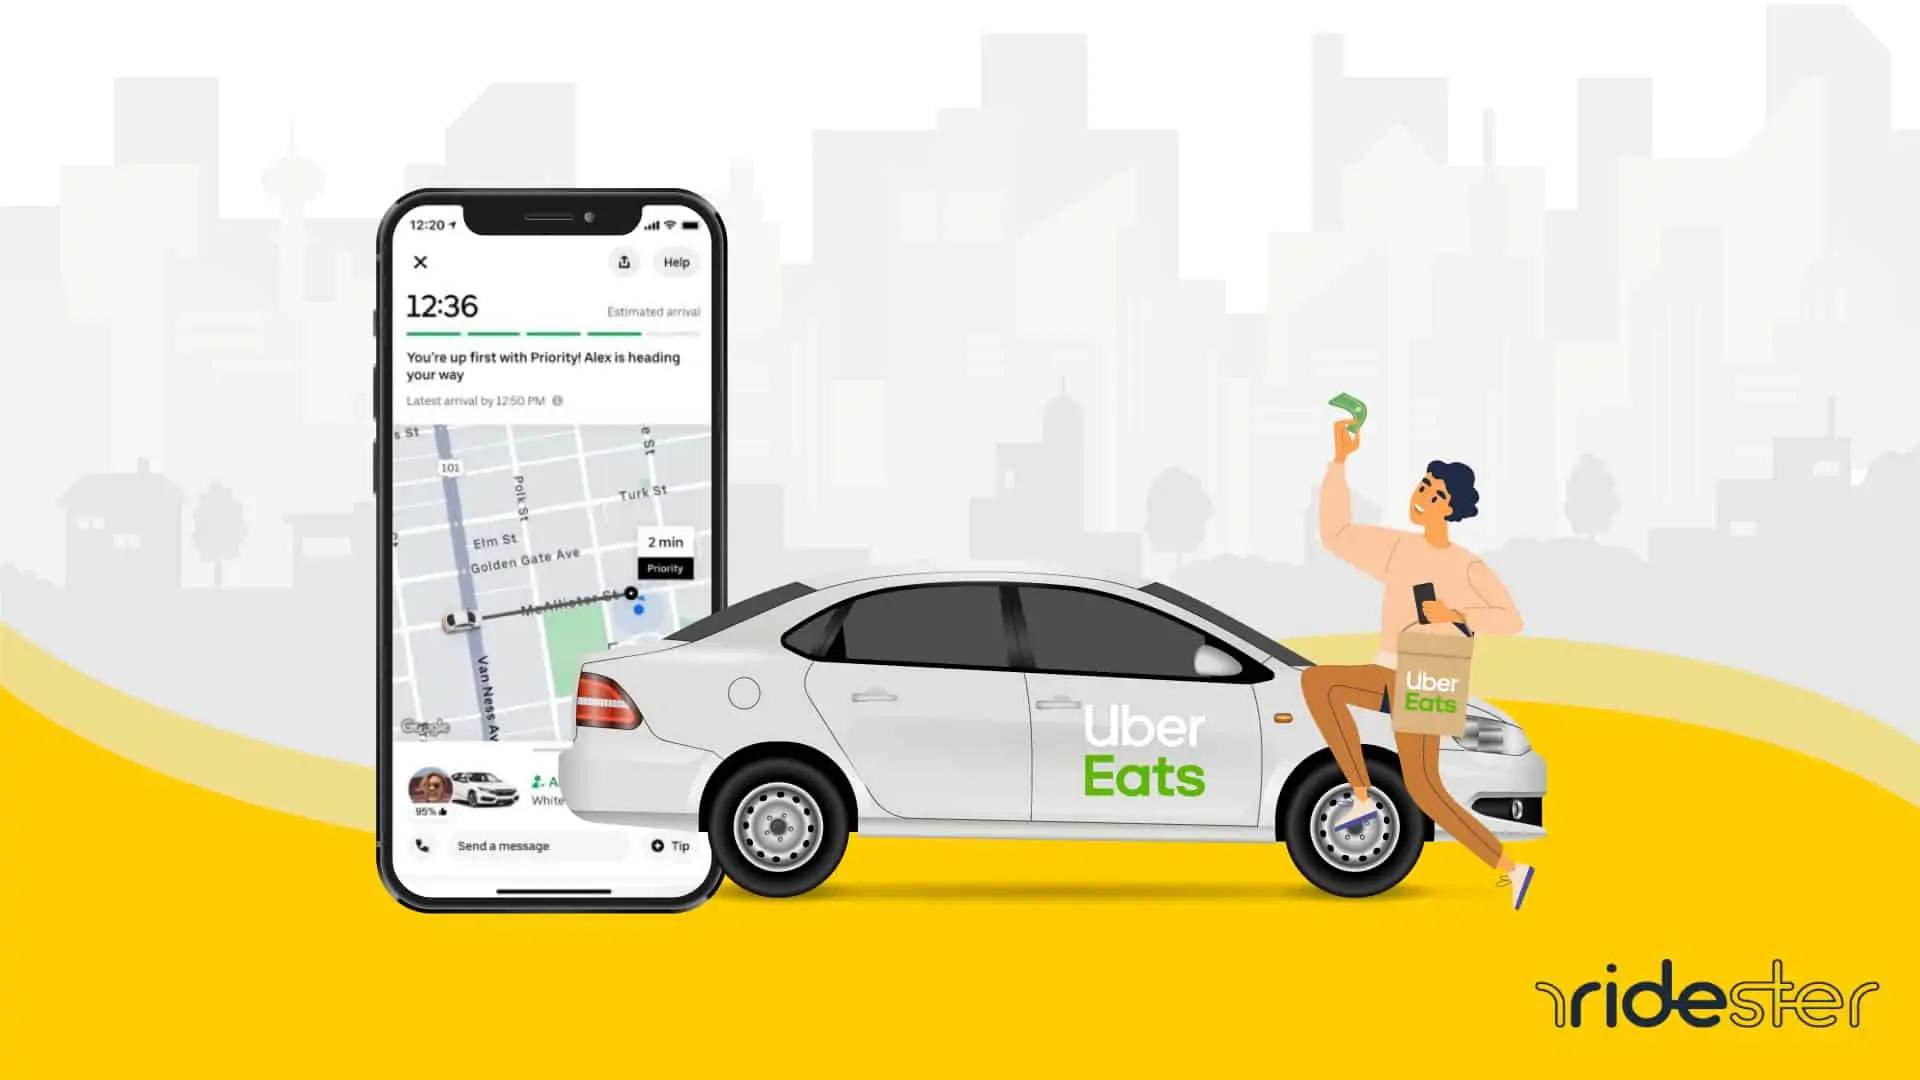 vector graphic showing an Uber Eats customer celebrating because they found an Uber Eats promo code